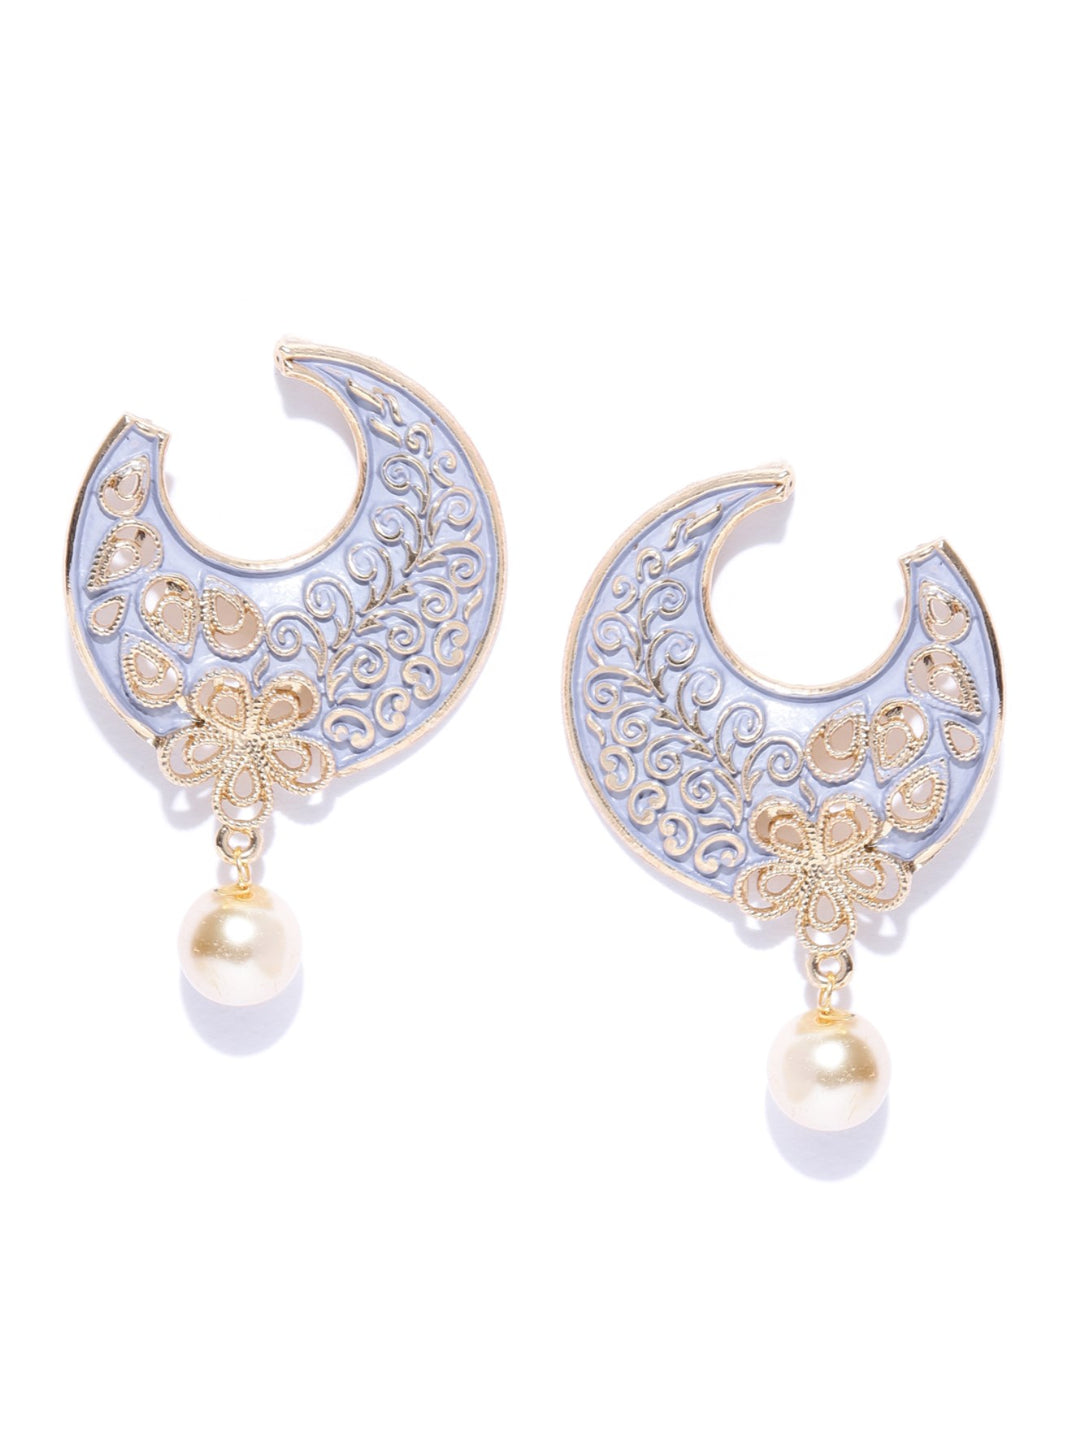 Designer Gold Plated Floral Design Skyblue Chandbalis Drop Earrings With Pearl For Women and Girls